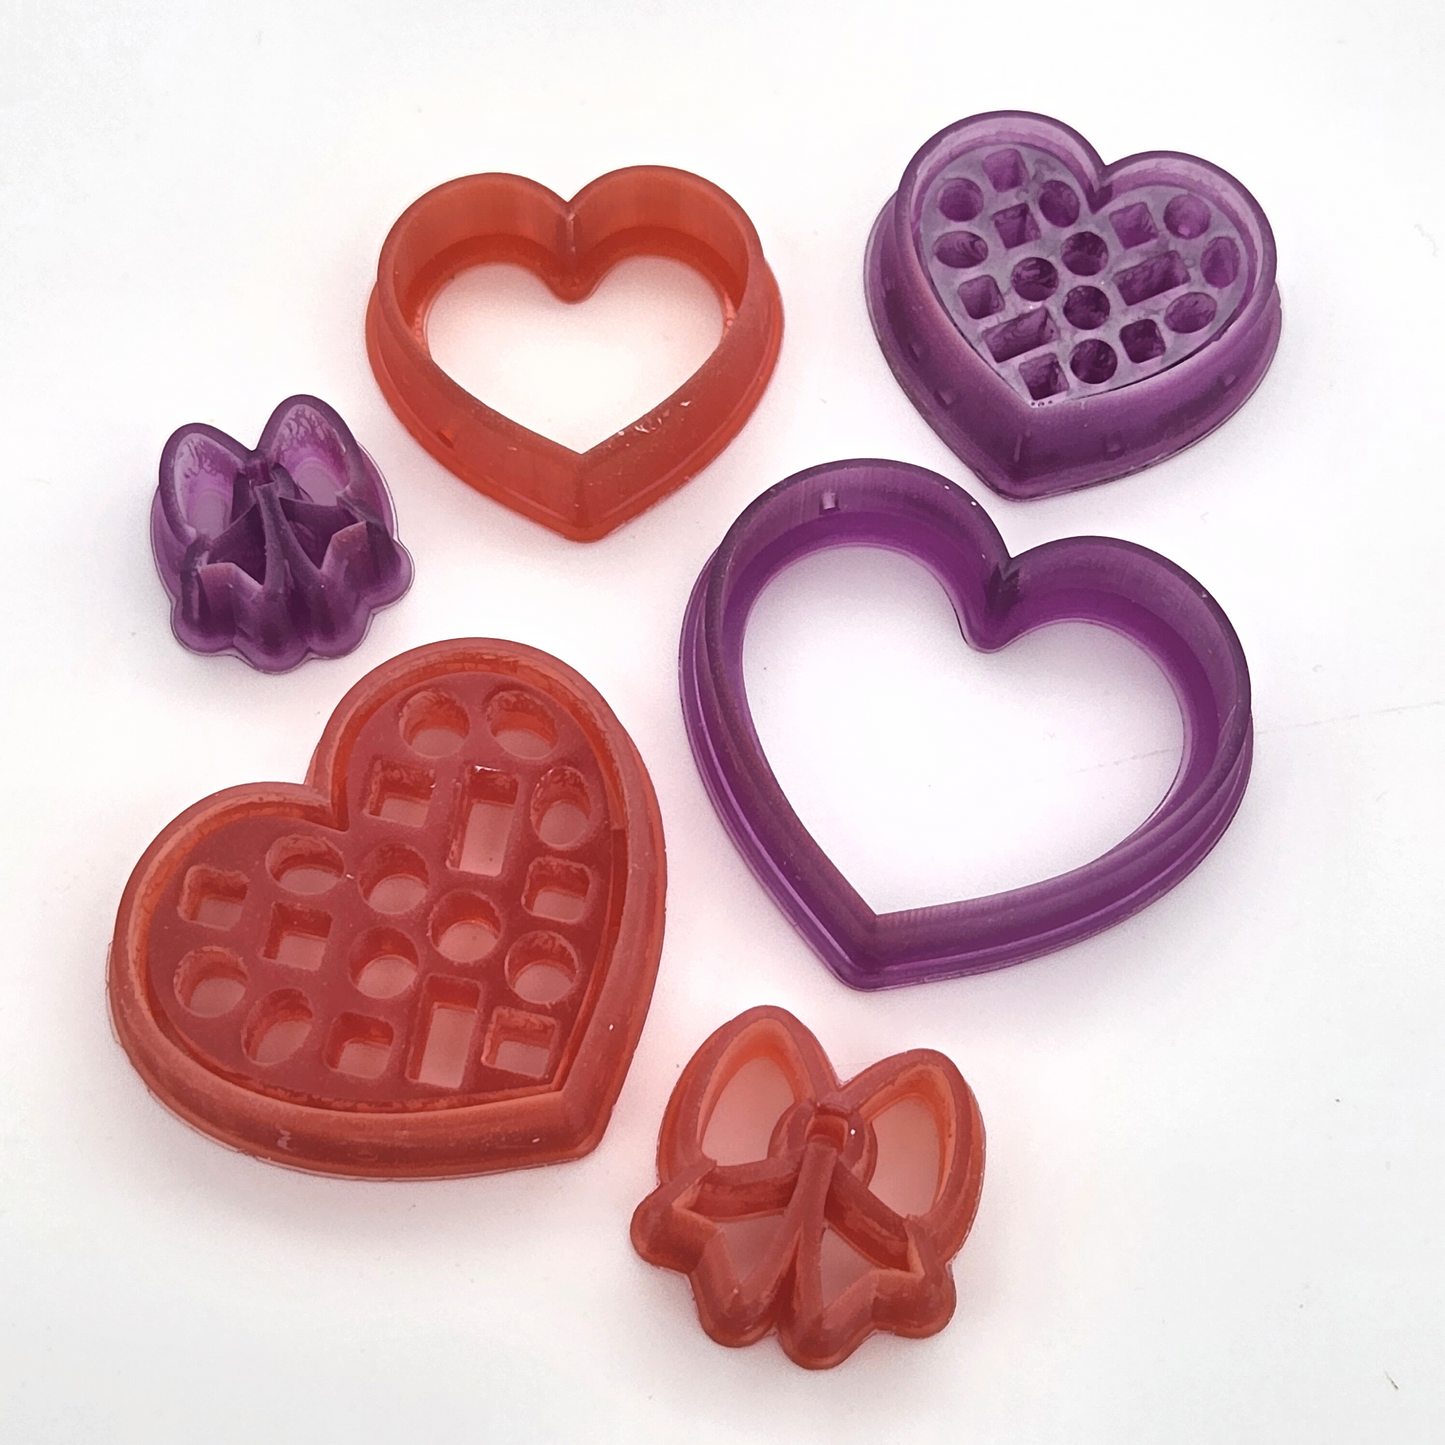 3D Printed Resin box of chocolates clay cutter set including three cutters, a heart-shaped box of chocolates, a lid for the box, and a bow for the lid. Zoomed n close up angle to show sharp edge details